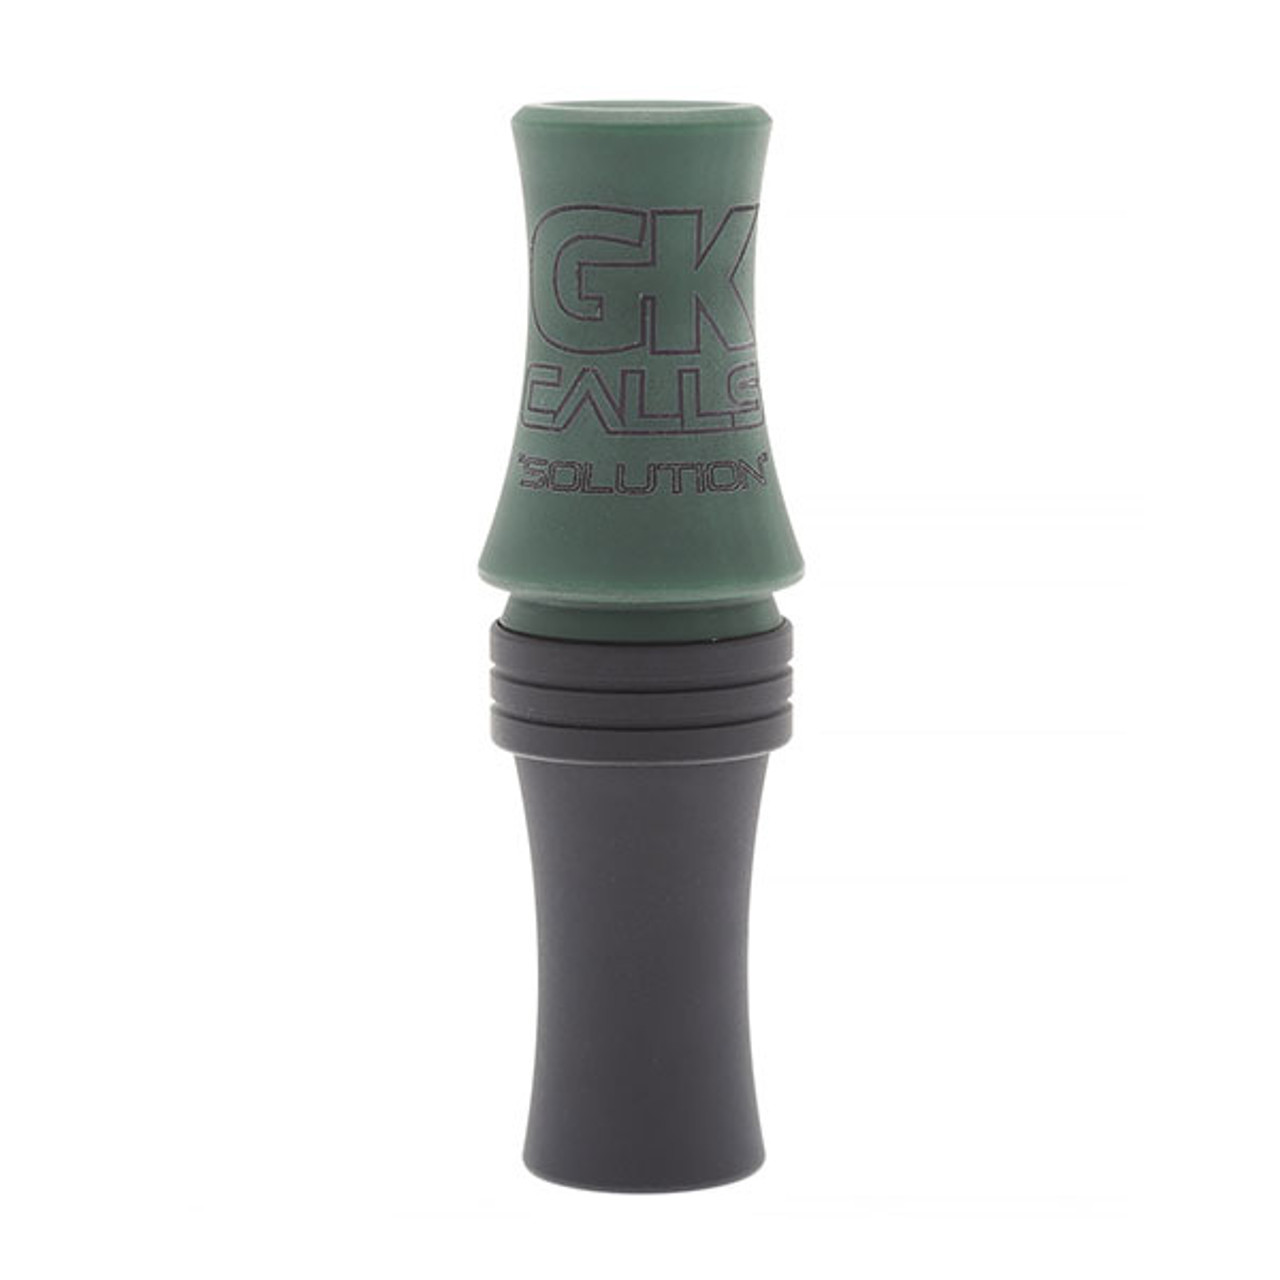 The "Solution" Short Reed Goose Call